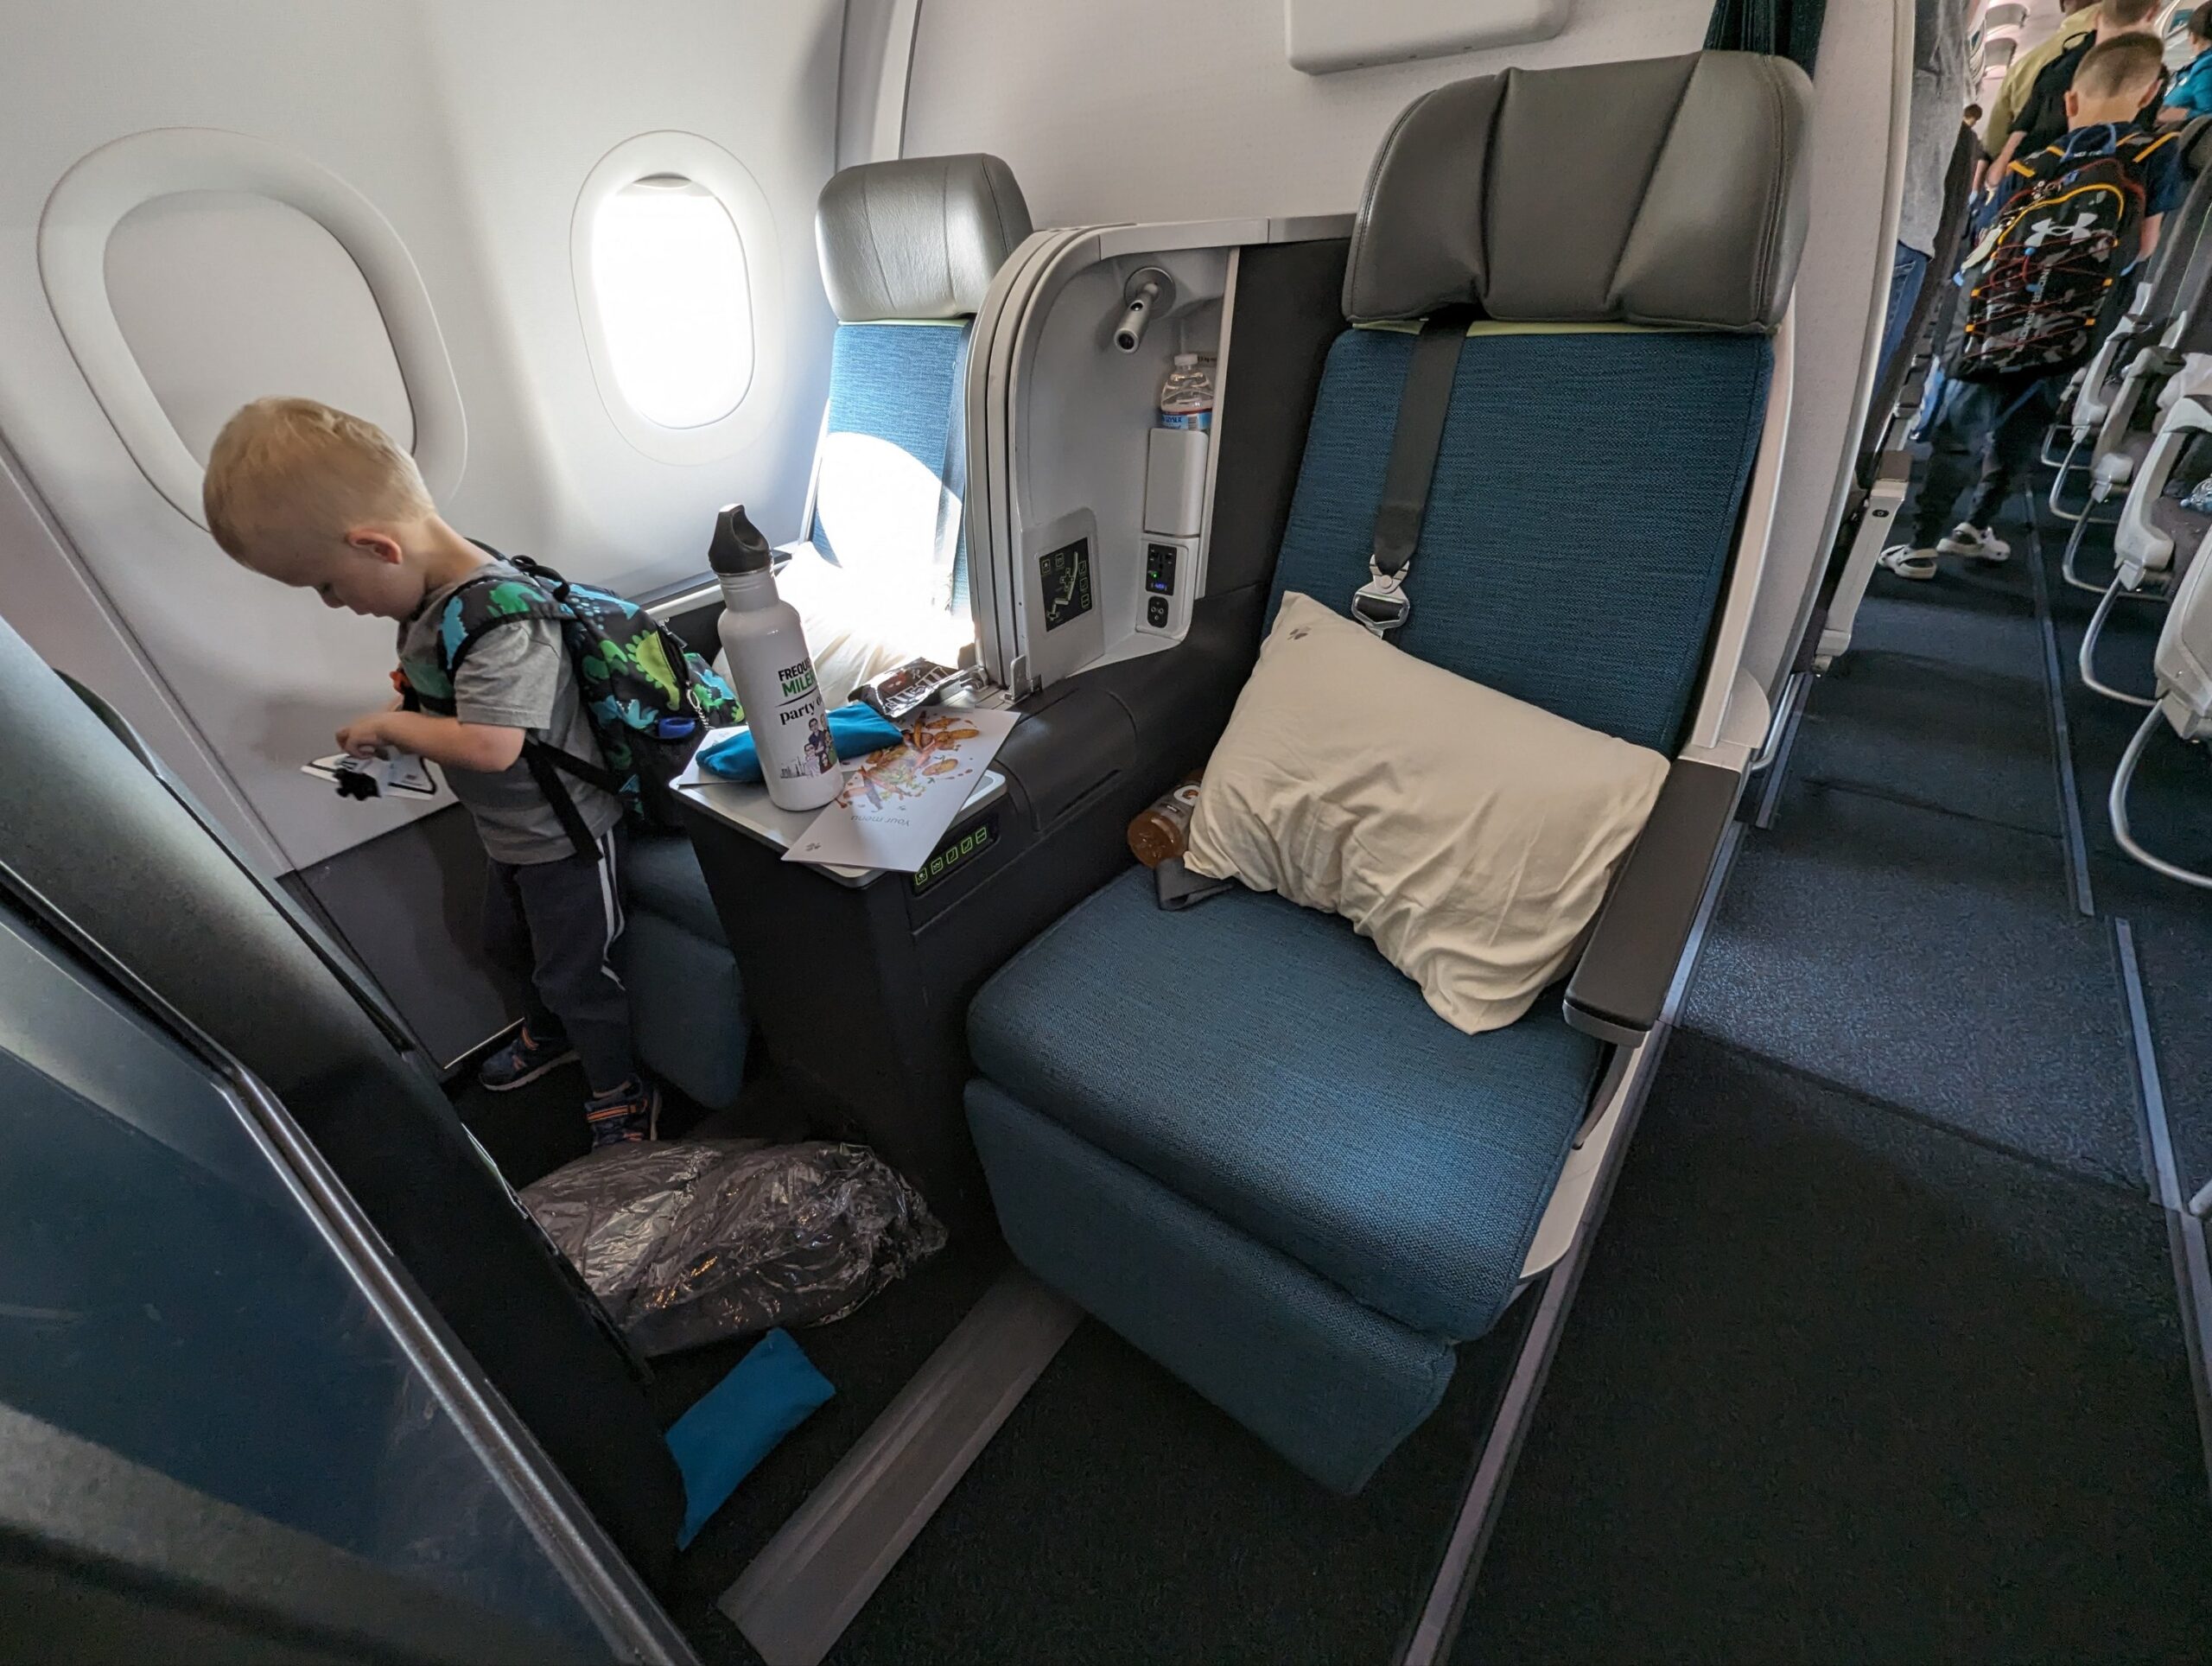 a child standing in a chair in an airplane